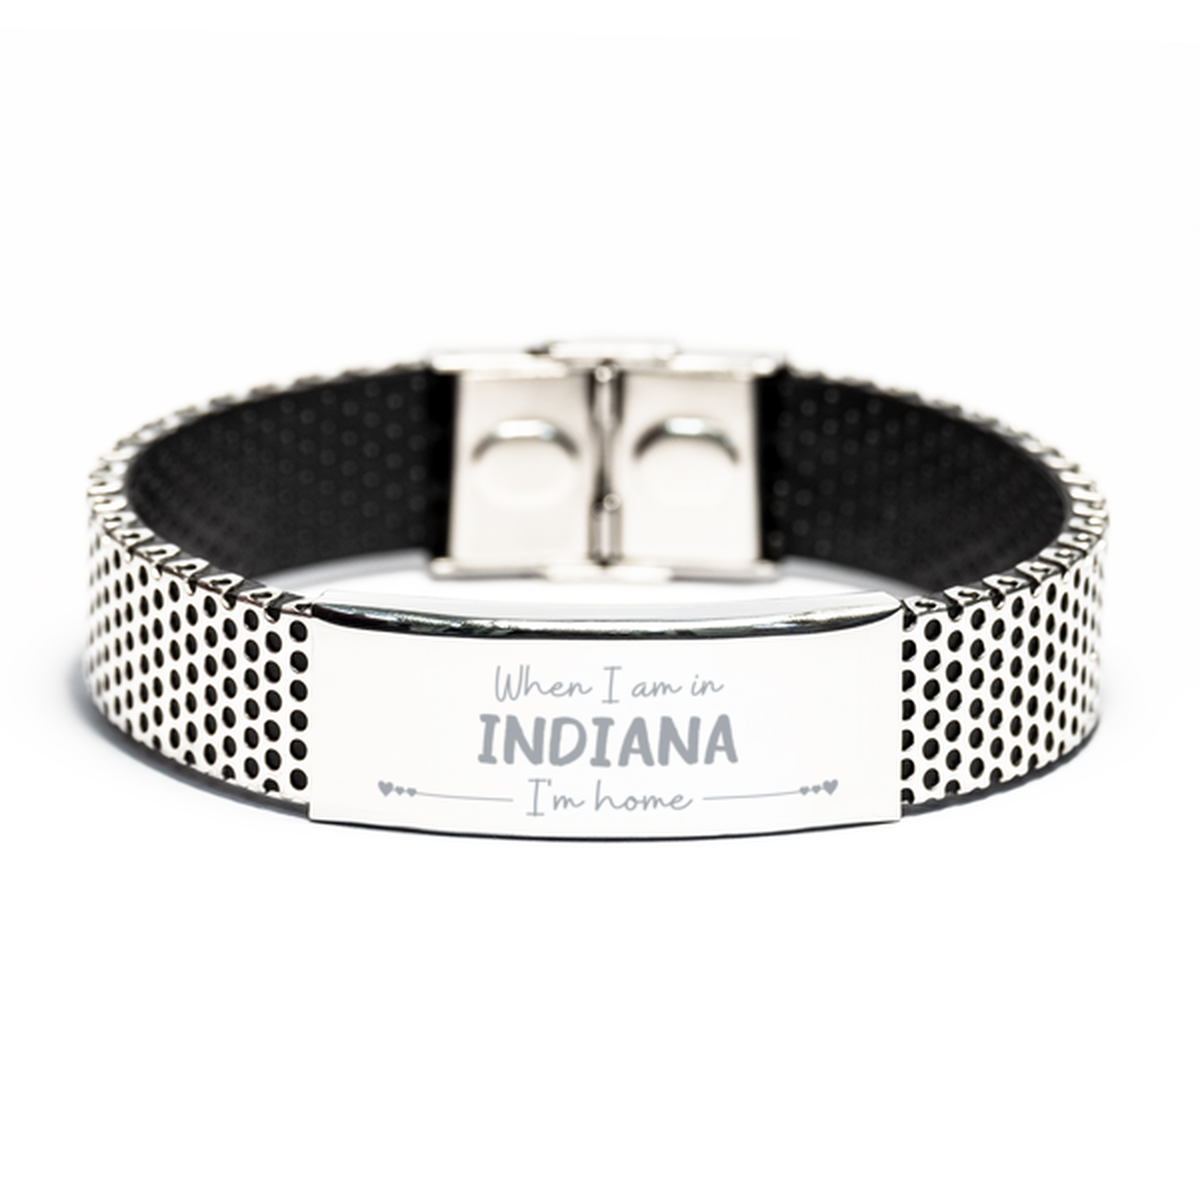 When I am in Indiana I'm home Stainless Steel Bracelet, Cheap Gifts For Indiana, State Indiana Birthday Gifts for Friends Coworker